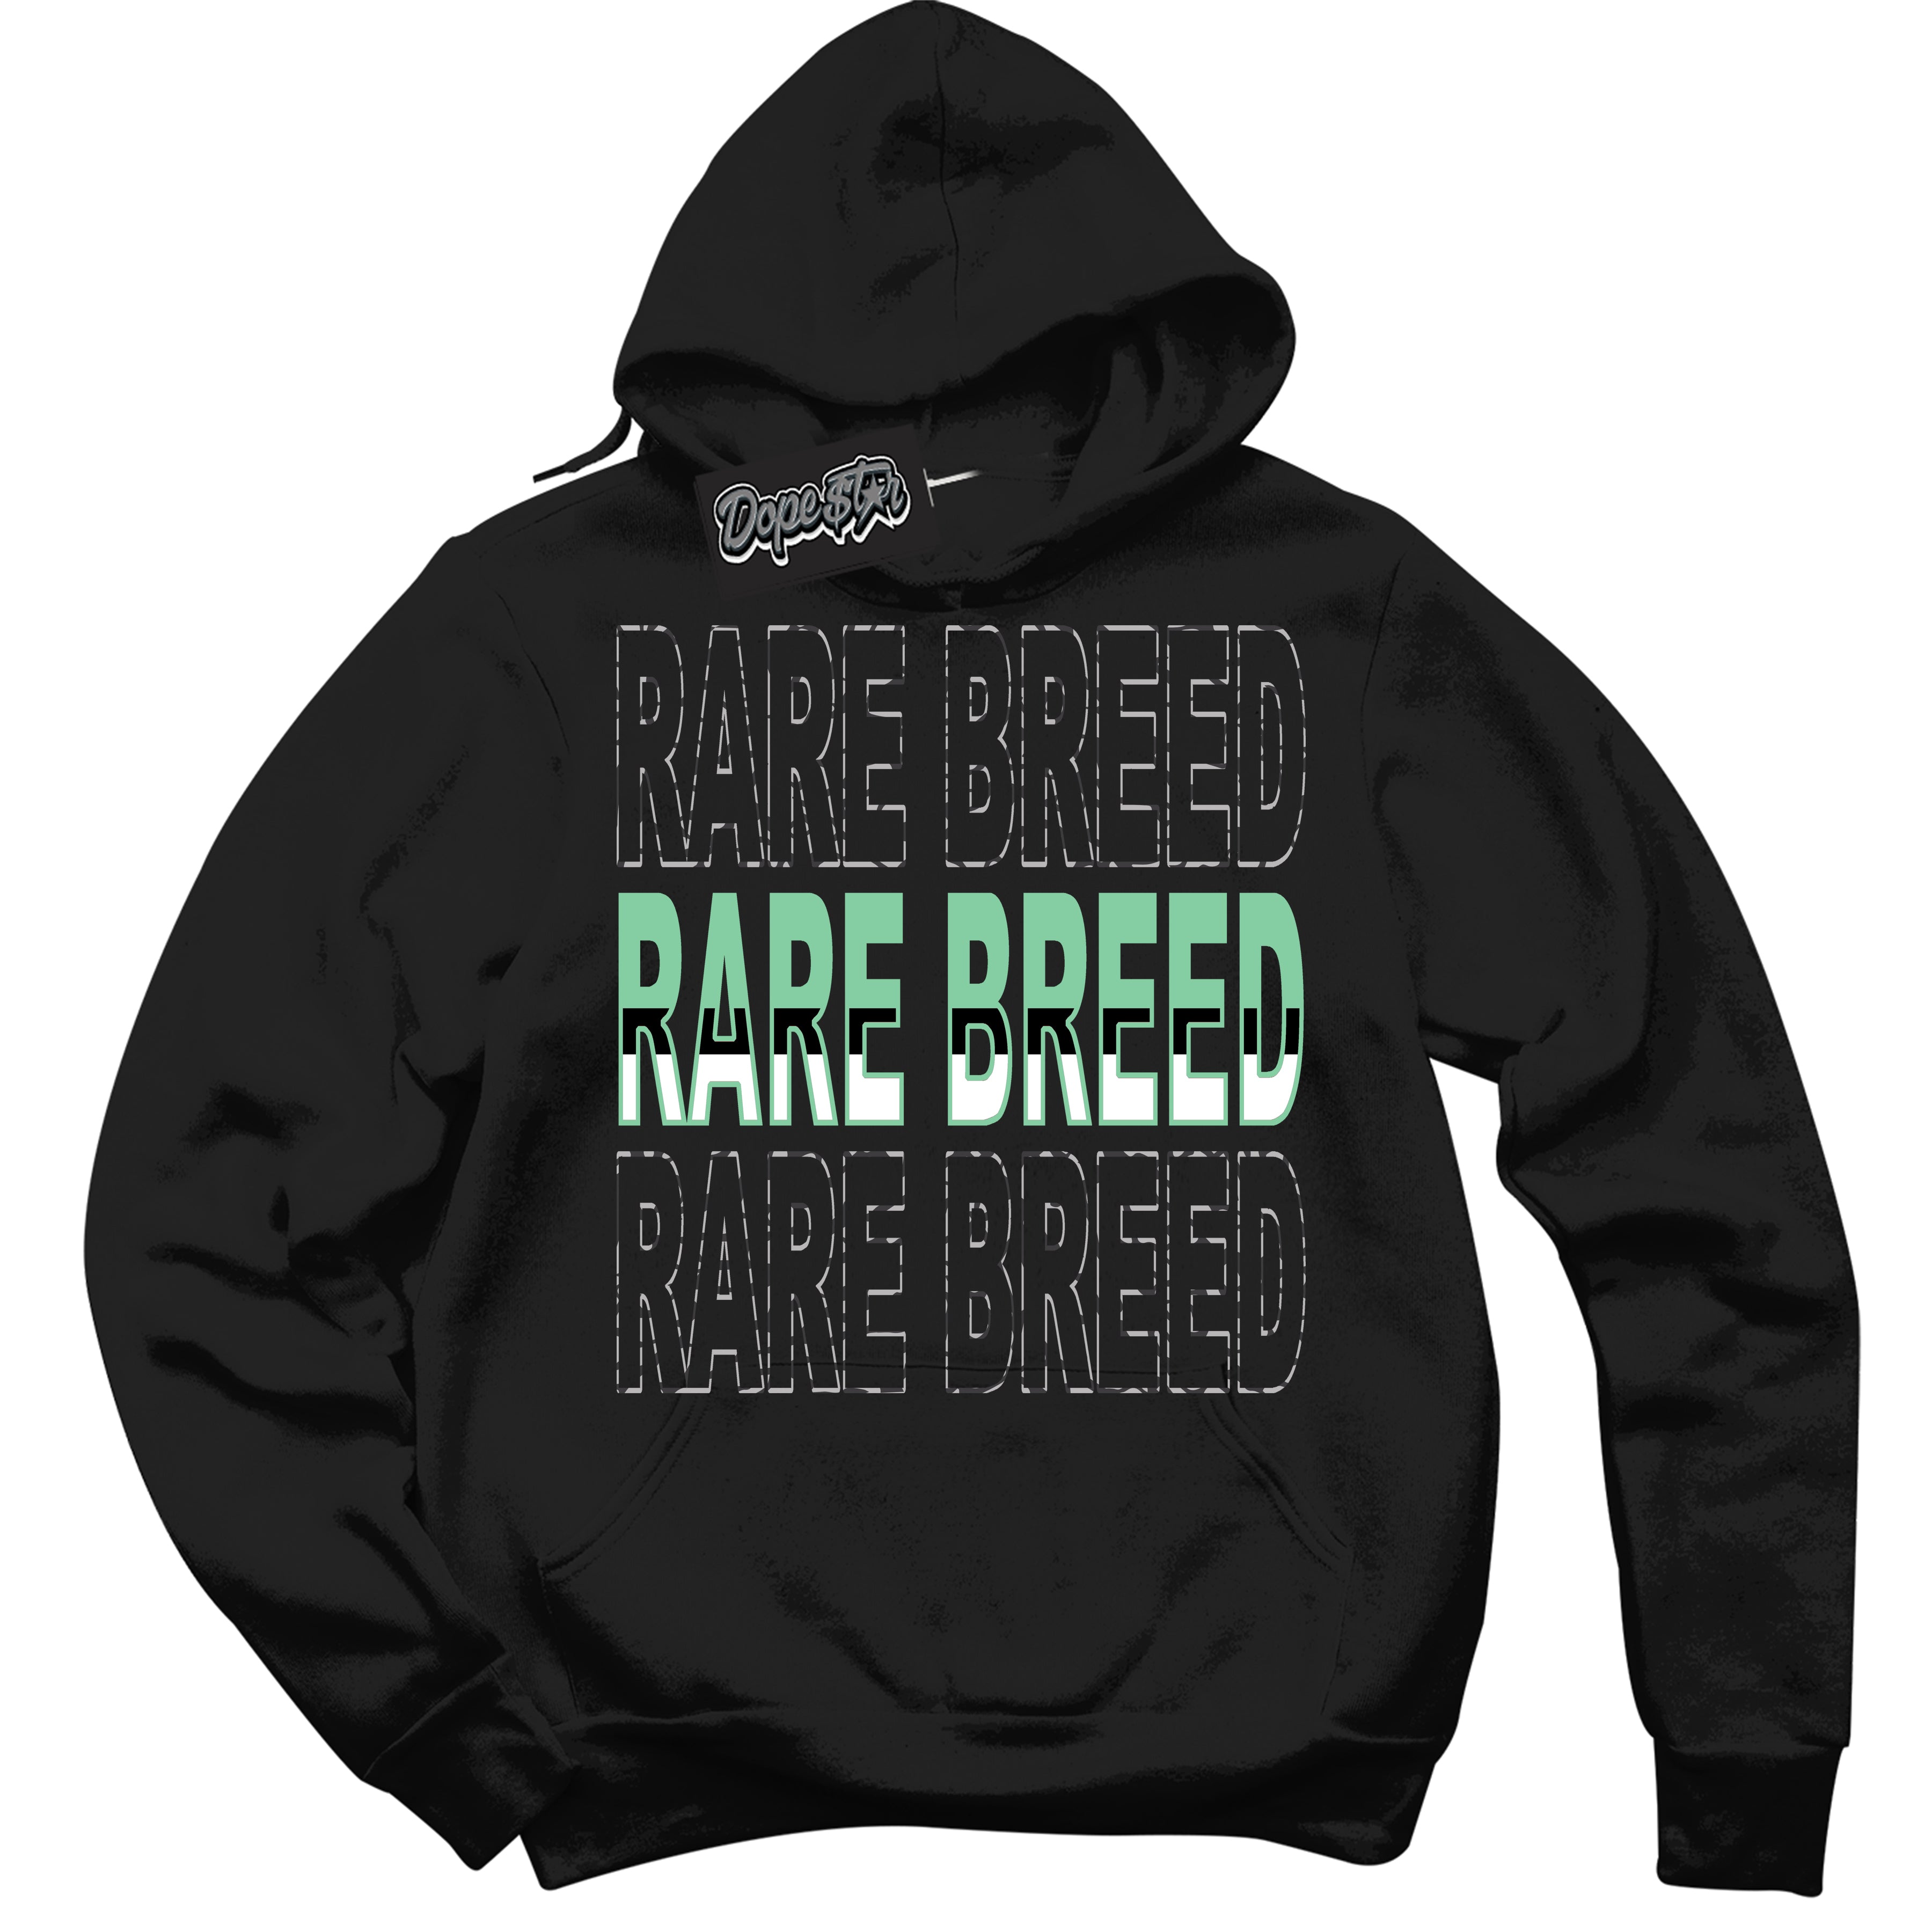 Cool Black Graphic DopeStar Hoodie with “ Rare Breed “ print, that perfectly matches Green Glow 3S sneakers